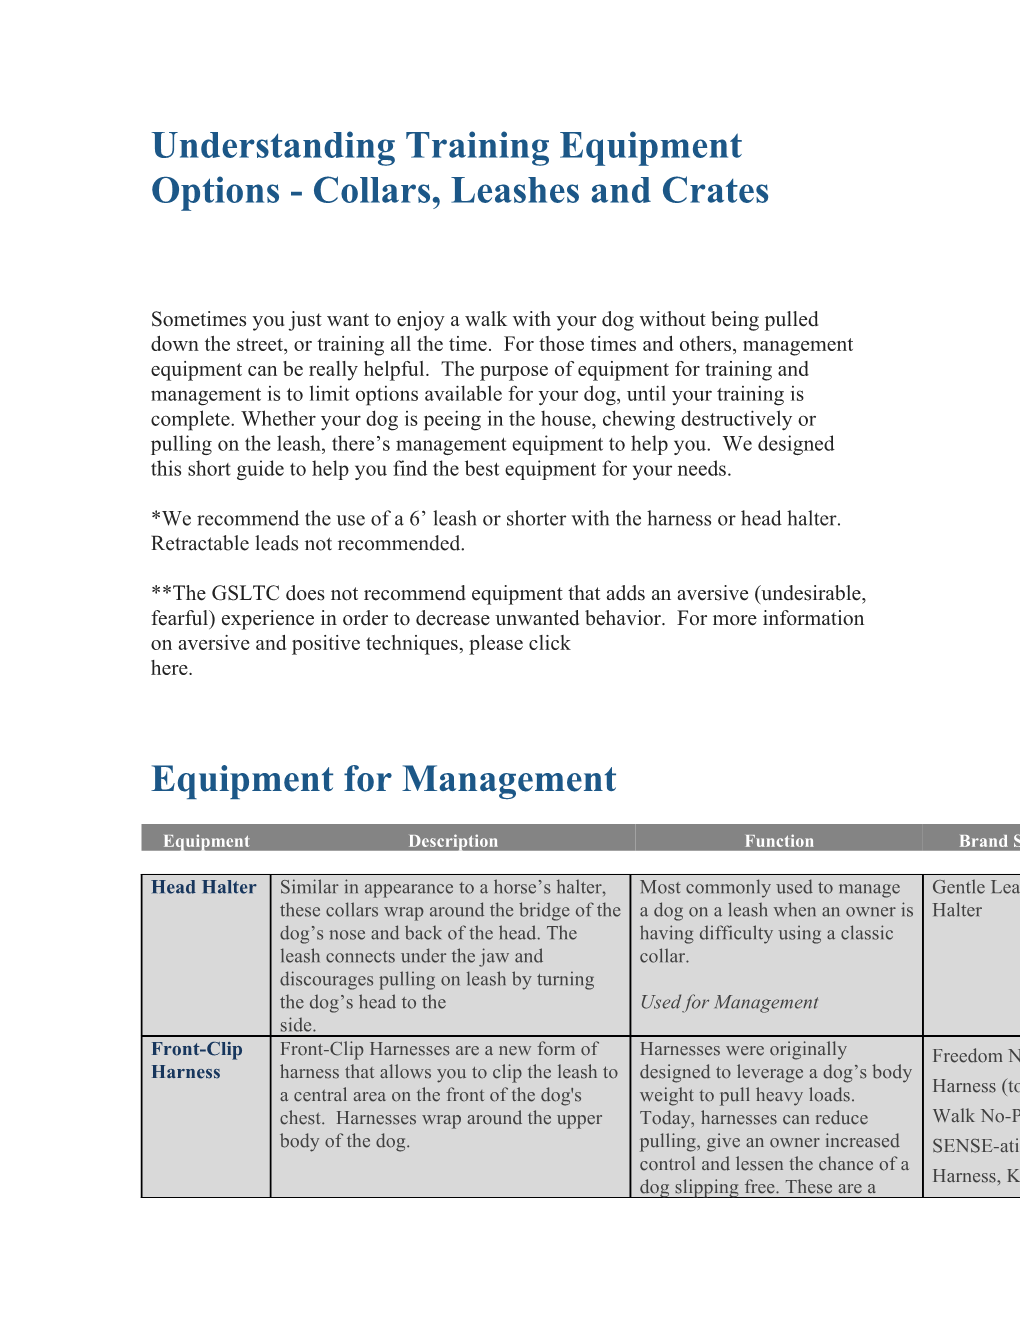 Understanding Training Equipment Options - Collars, Leashes and Crates